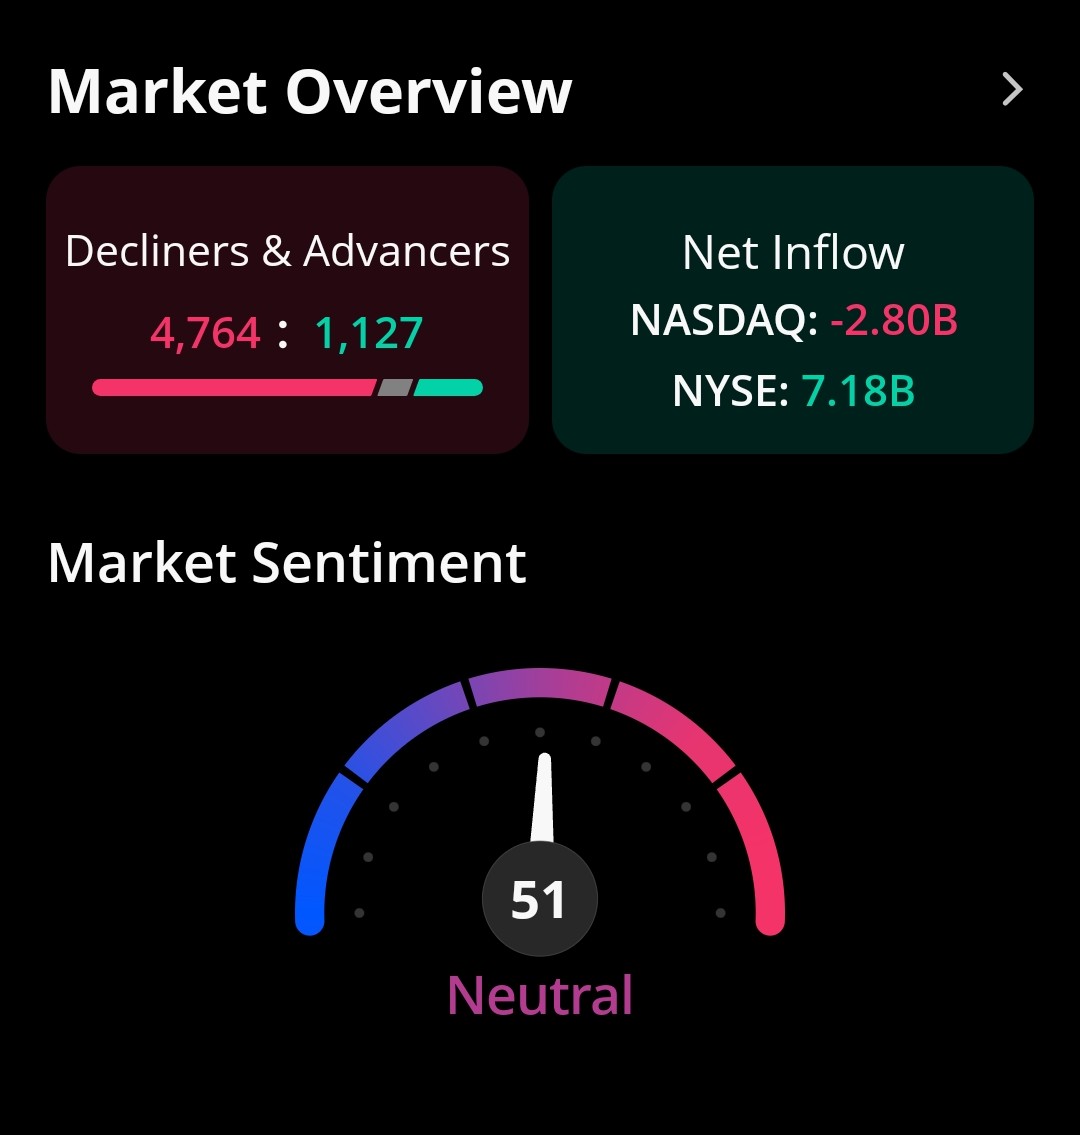 The way my morning started I would have never thought there were so many decliners #stocks #StockMarket #DayTrading #SwingTrading #investing #Trader